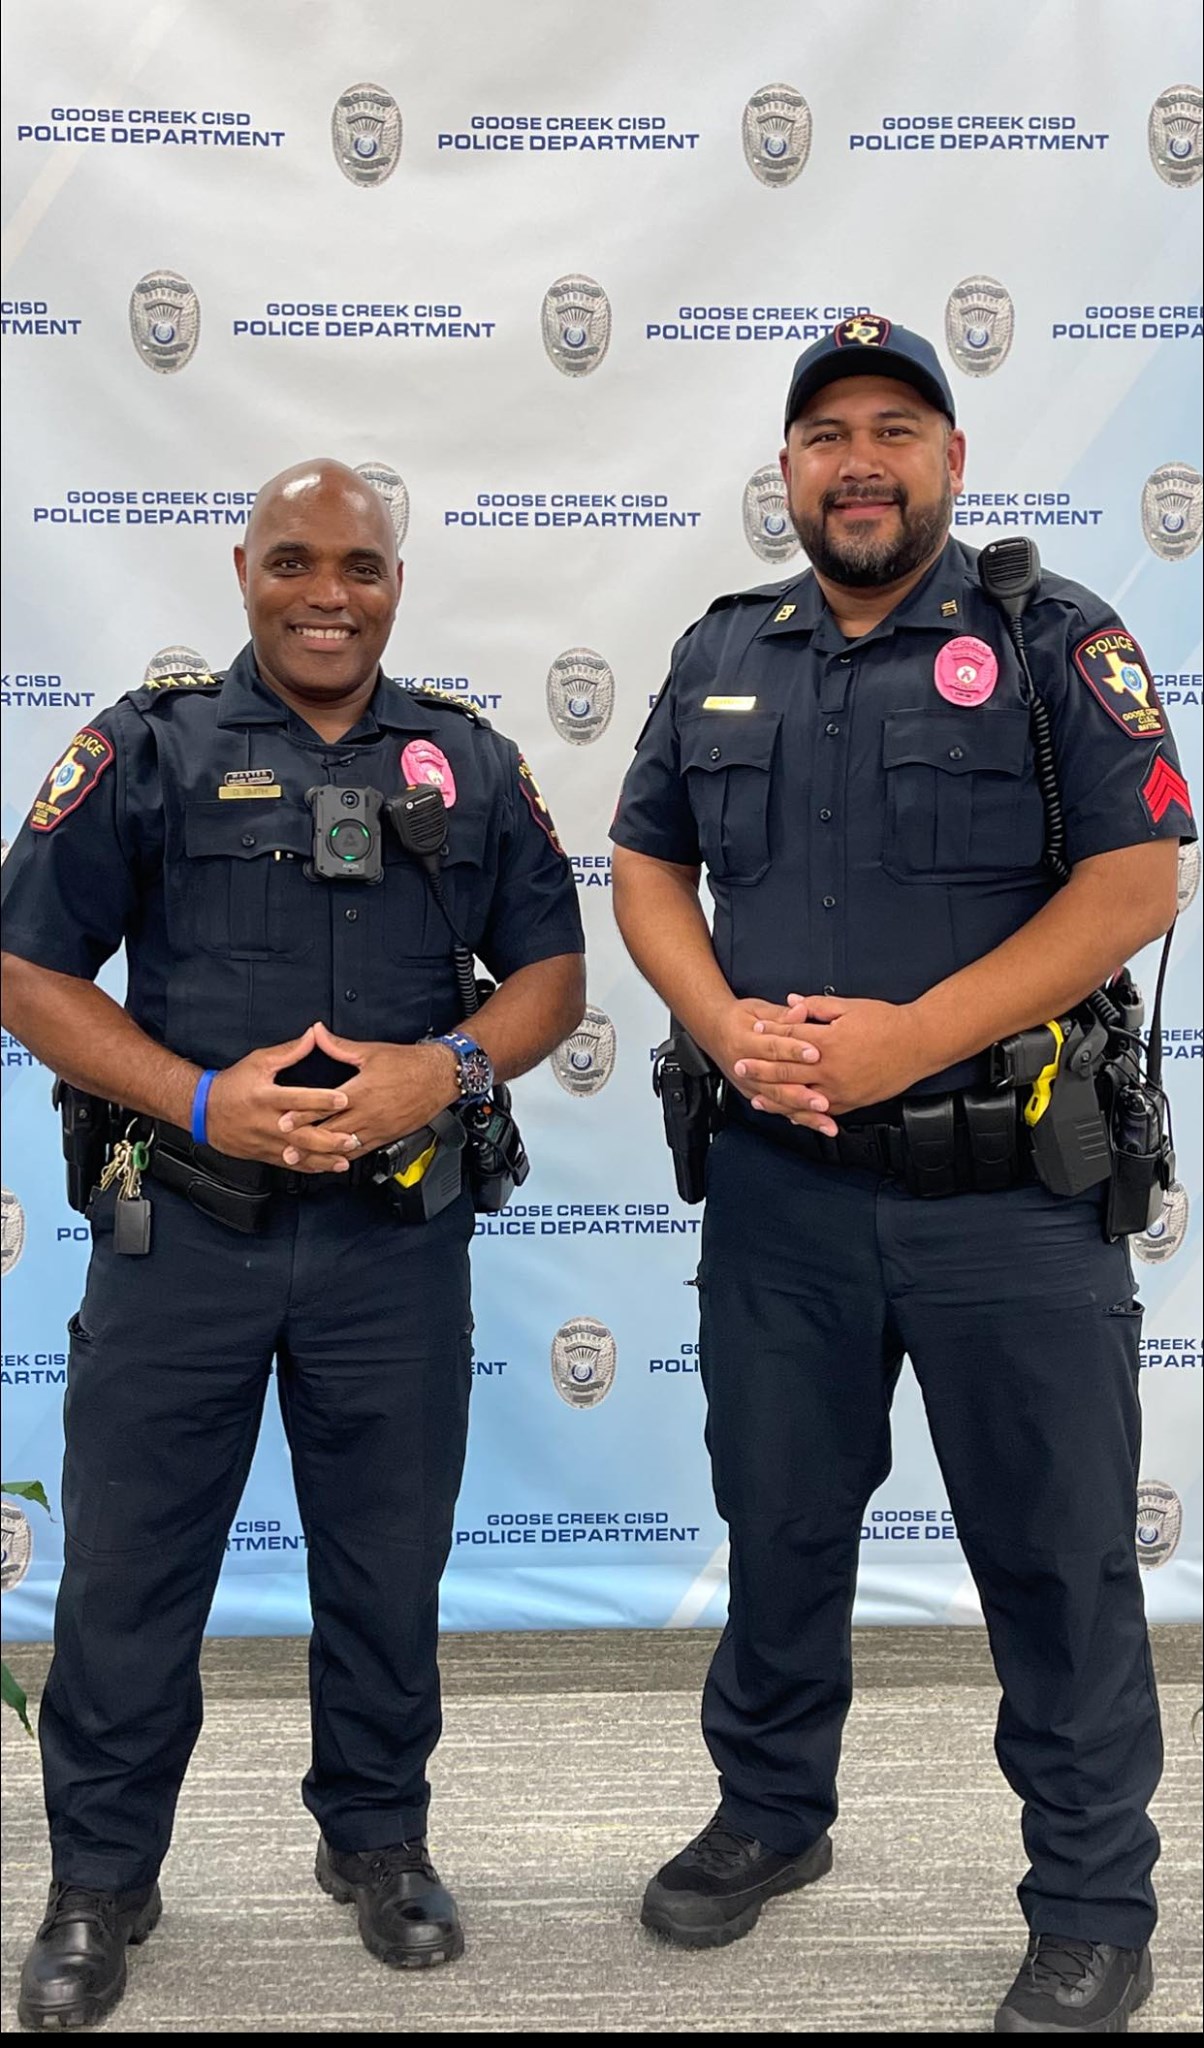 chief and police officer wear pink badges in honor of breast cancer awareness month.